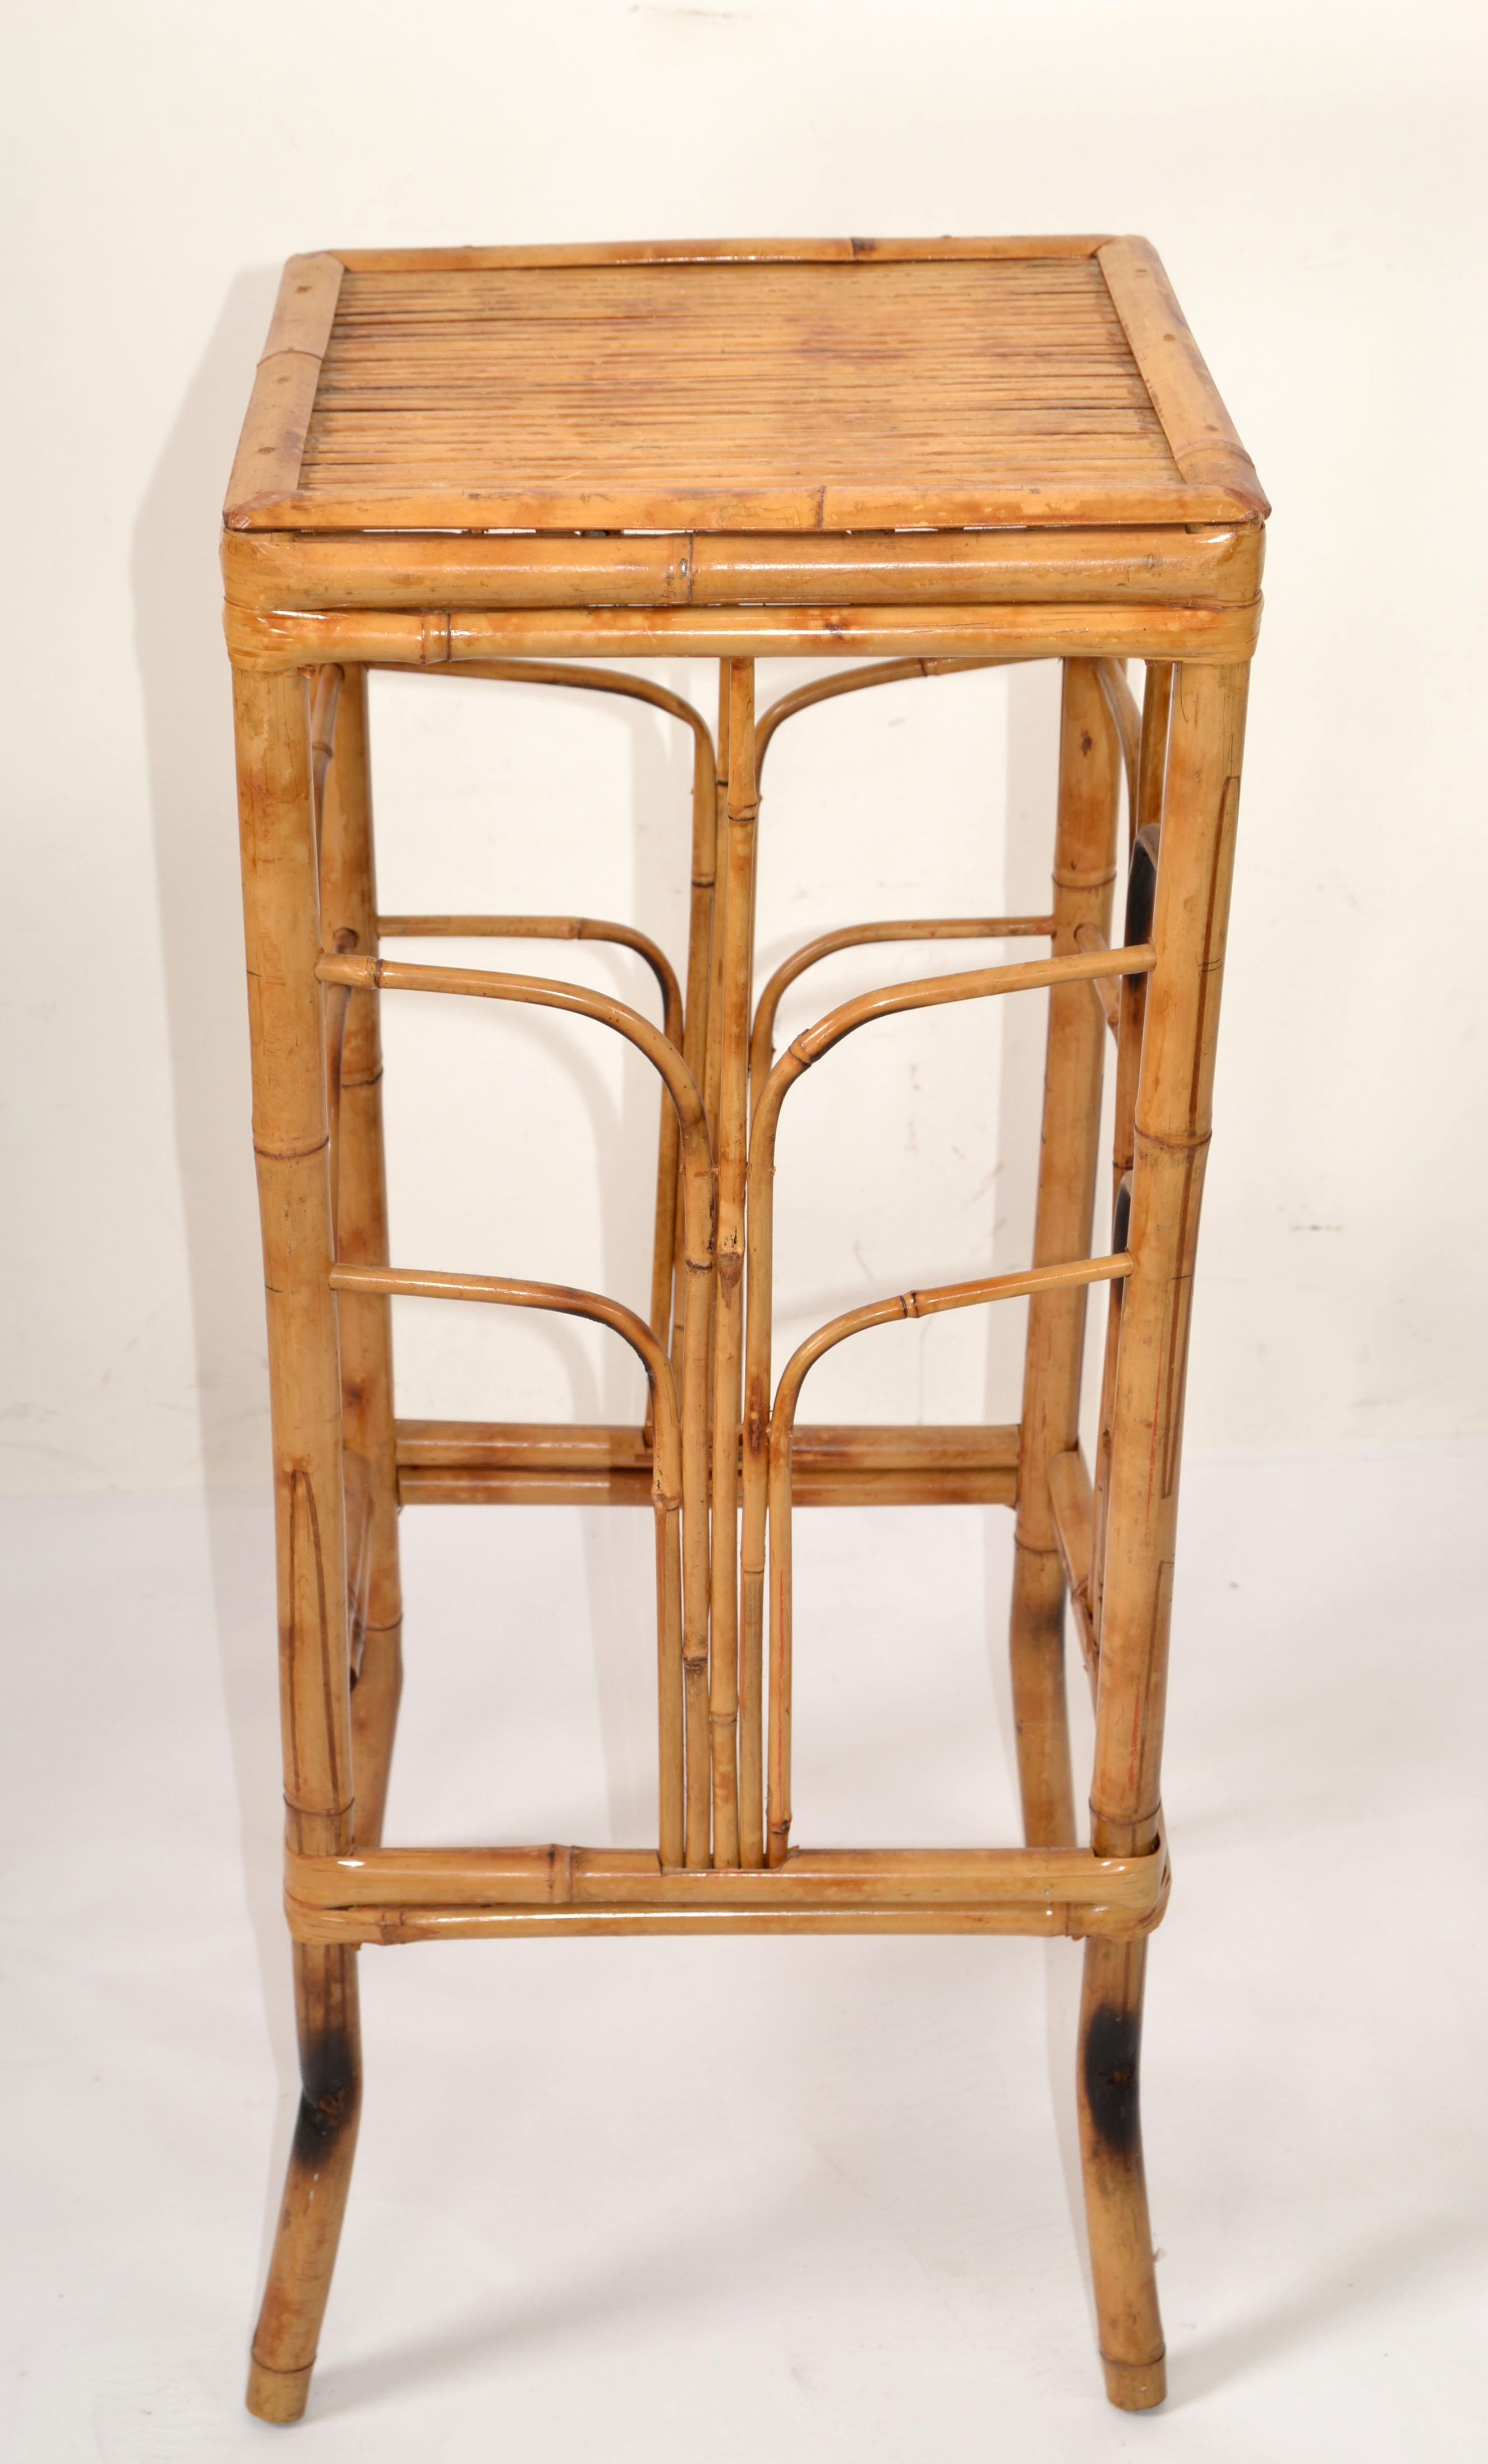 Vintage Chinoiserie handcrafted Plant Stand, Table, Pedestal, Colum with cane detail feature burnt bamboo frames and Chinese inspired bamboo patterns. 
This is a beautiful Bohemian Chic piece for your Pavilion.
Fits to any design in Your Tropical